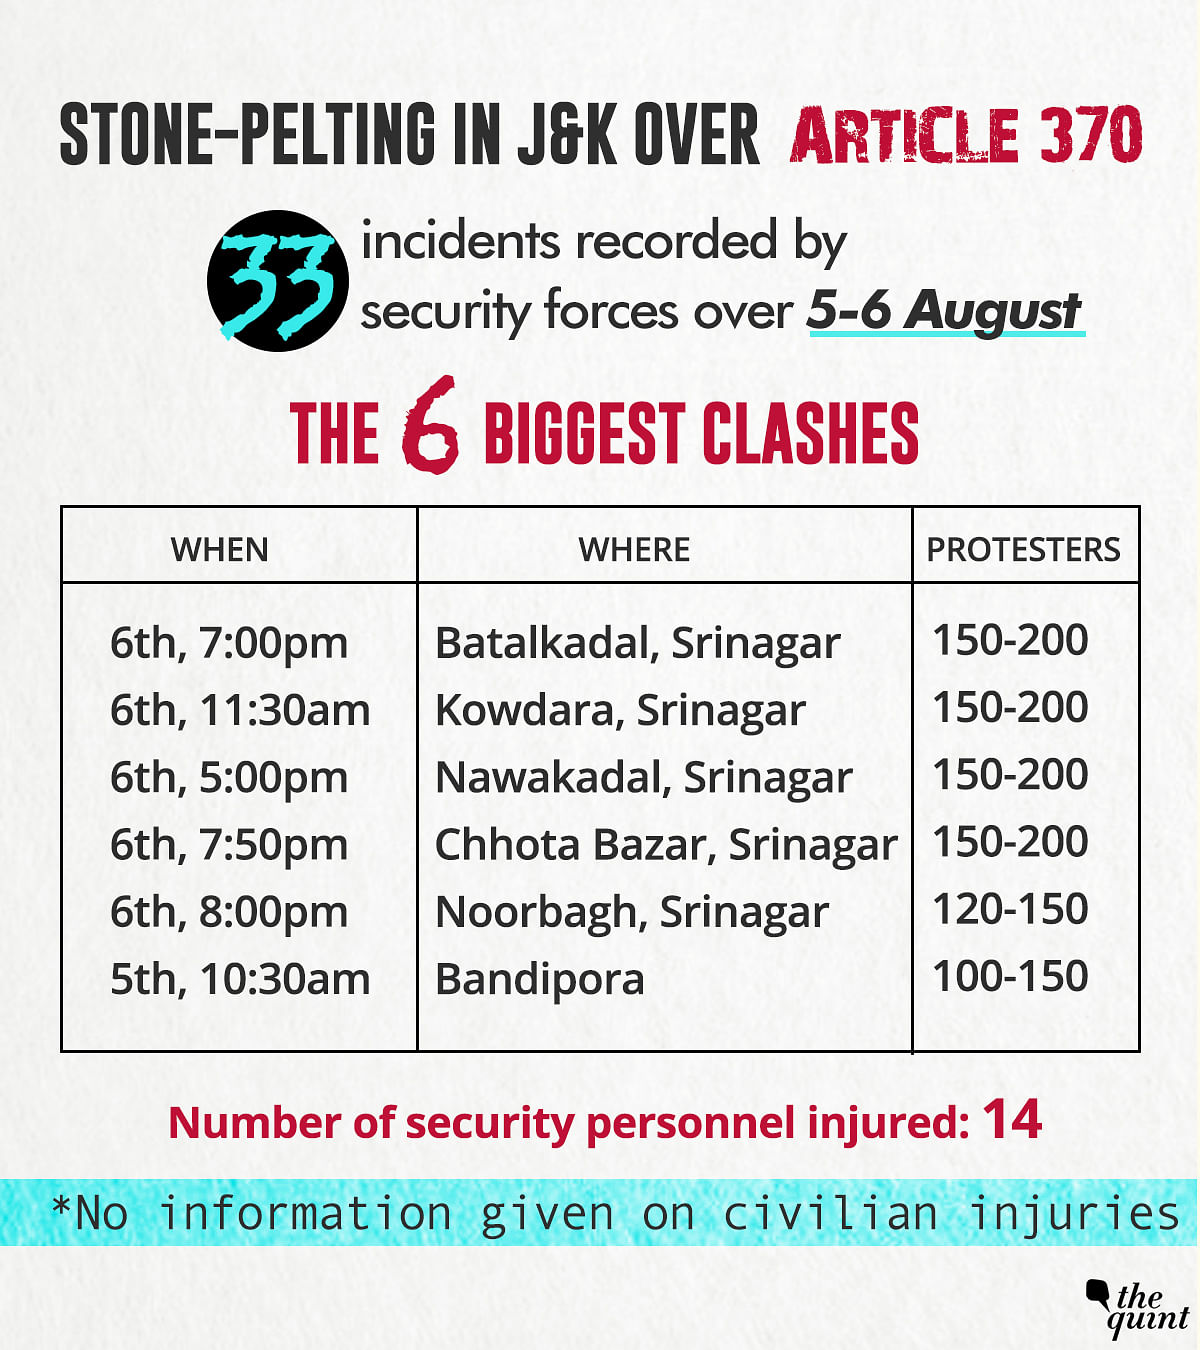 Sixteen security personal injured in 55 stone-pelting incidents in J&K. No information  on civilian injury. 